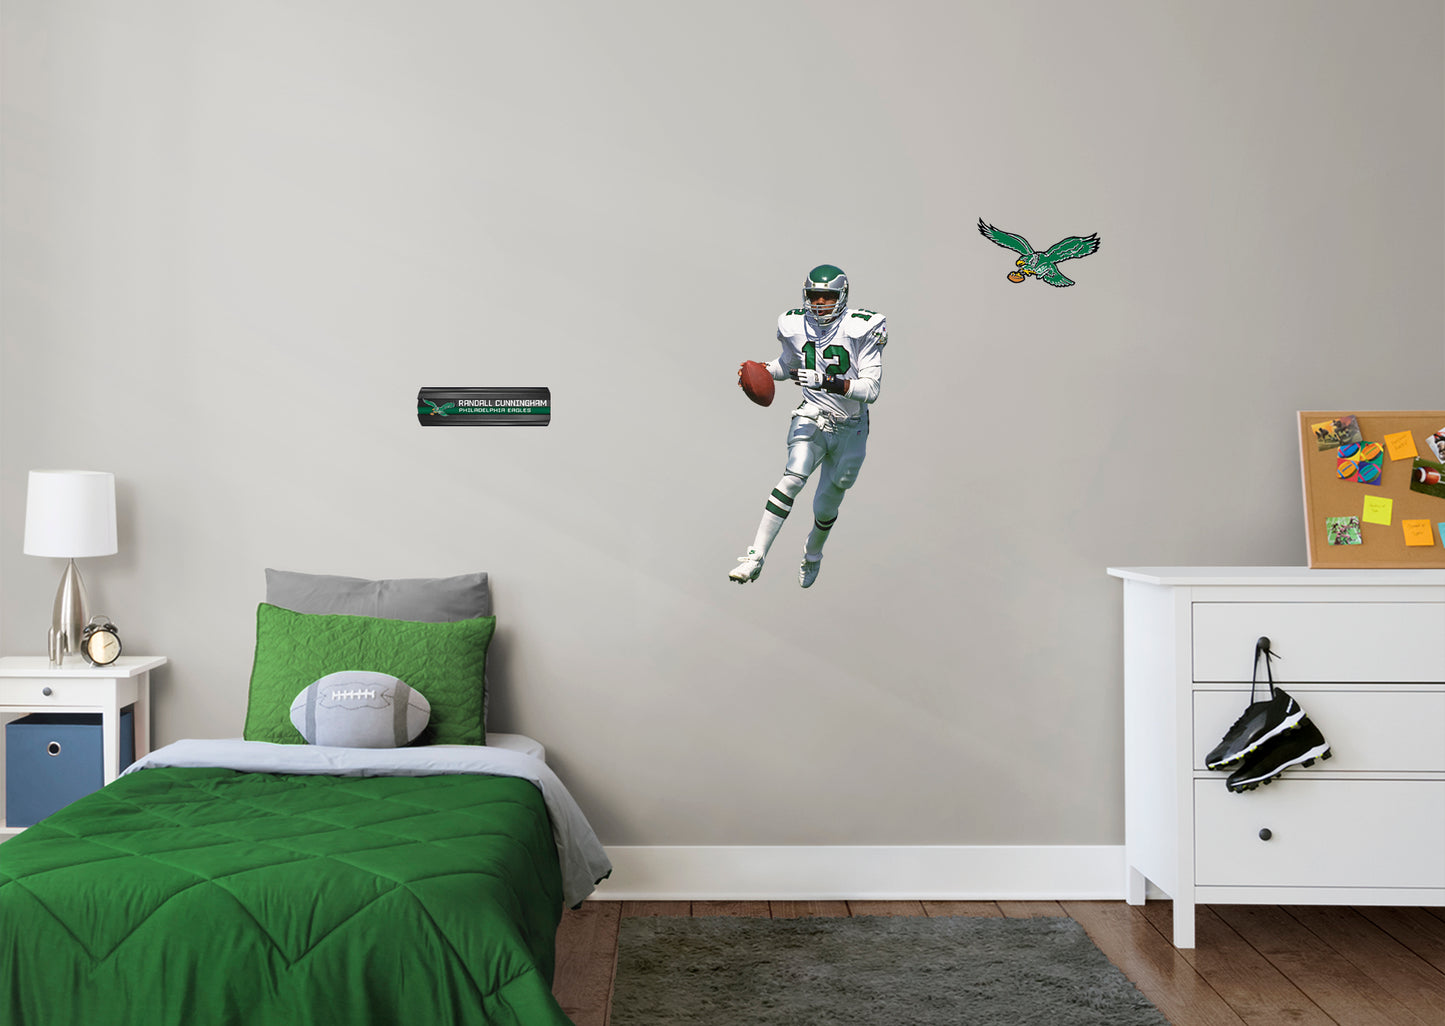 Philadelphia Eagles: Randall Cunningham  Legend        - Officially Licensed NFL Removable Wall   Adhesive Decal